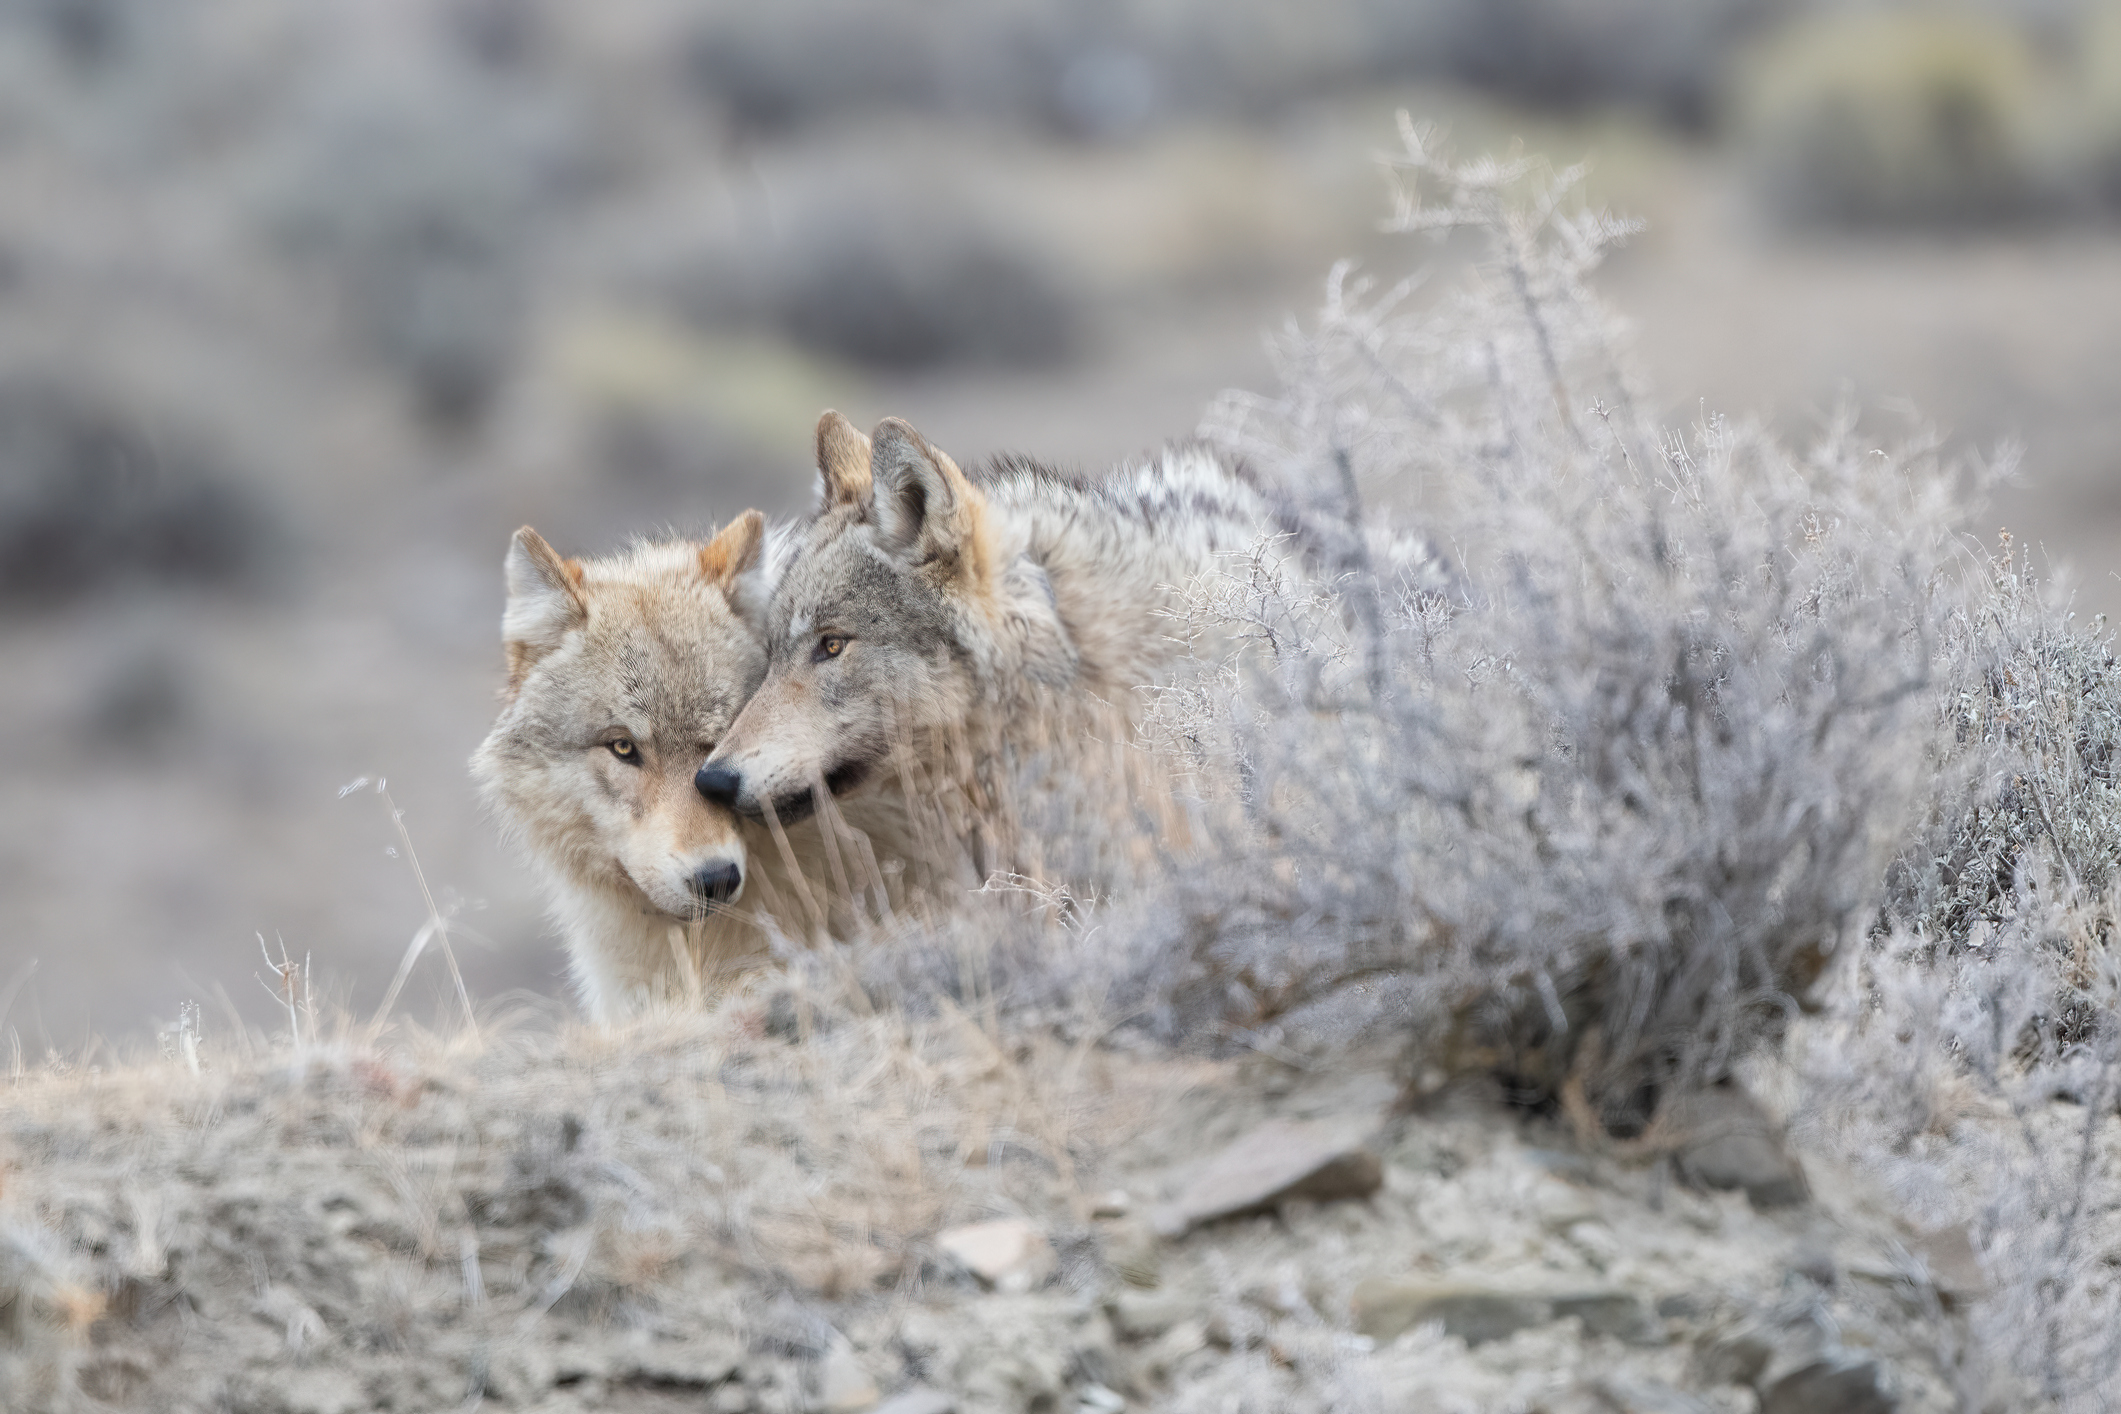 Two Grey wolf (mostly white/tan colored) share a tender moment together for portrait in Yellowstone National Park (USA)